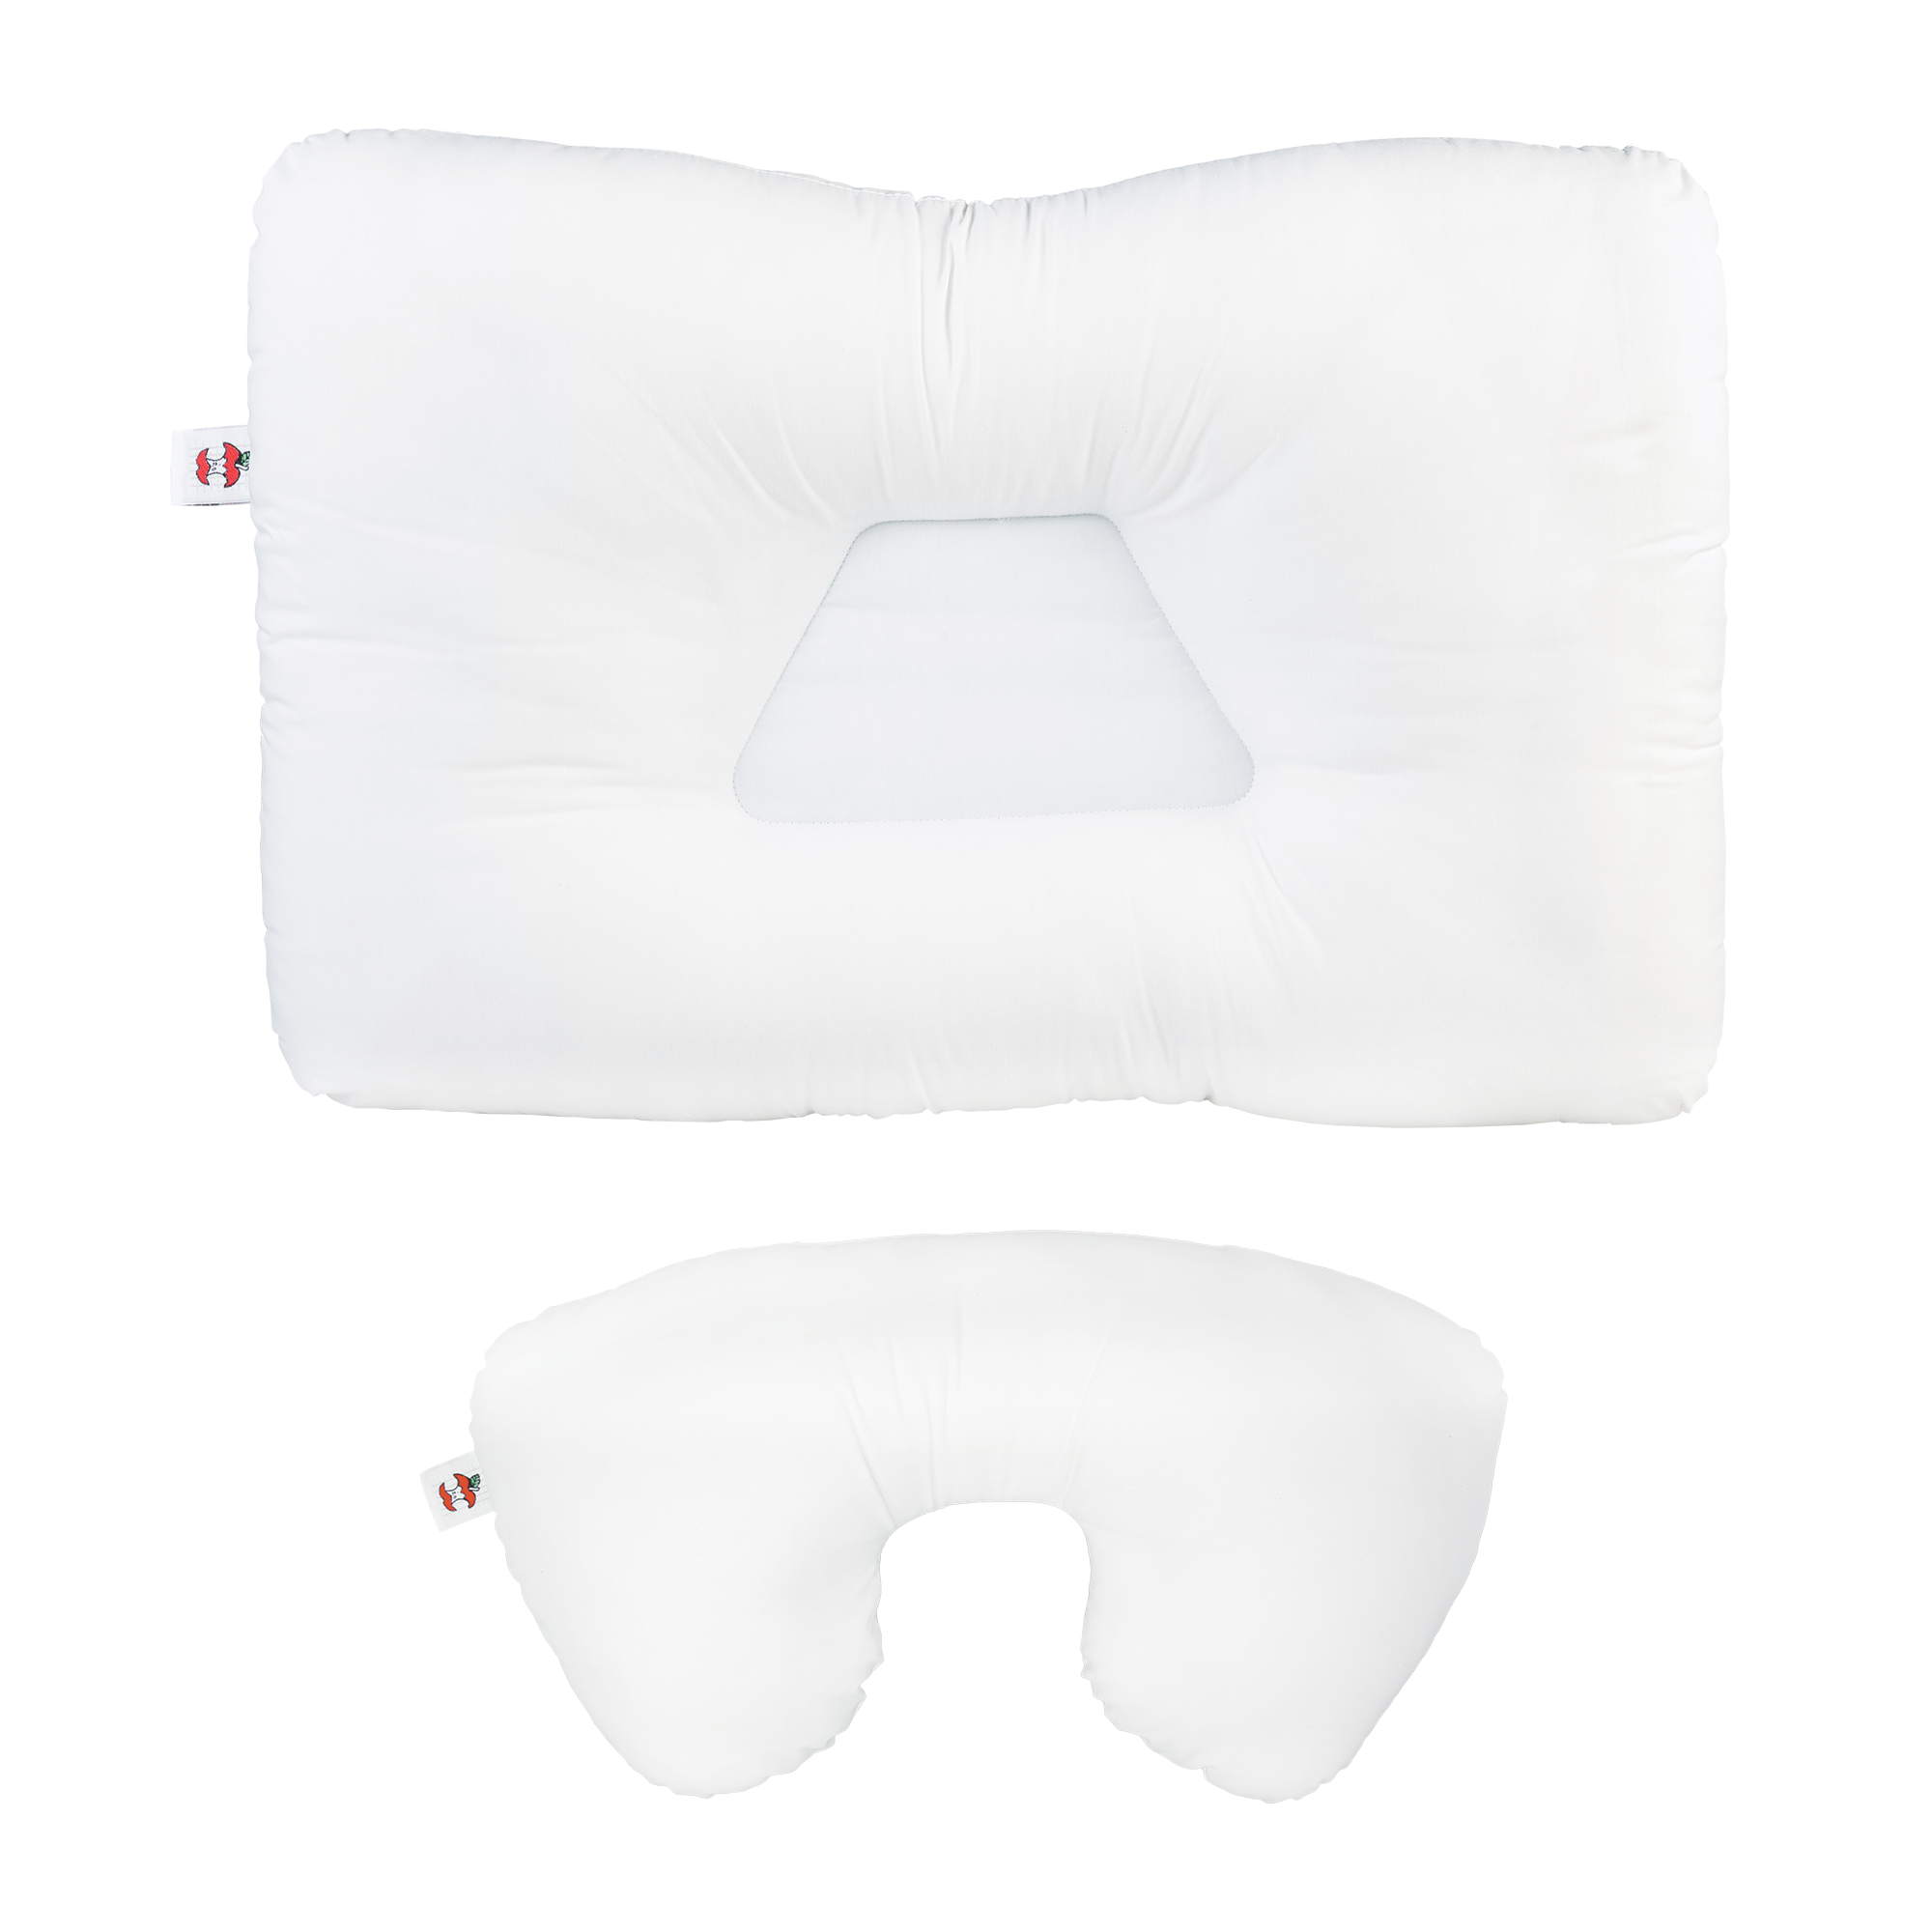 Tri-Core Cervical Support Pillow - Mid-size, Firm & Travel Core Combo